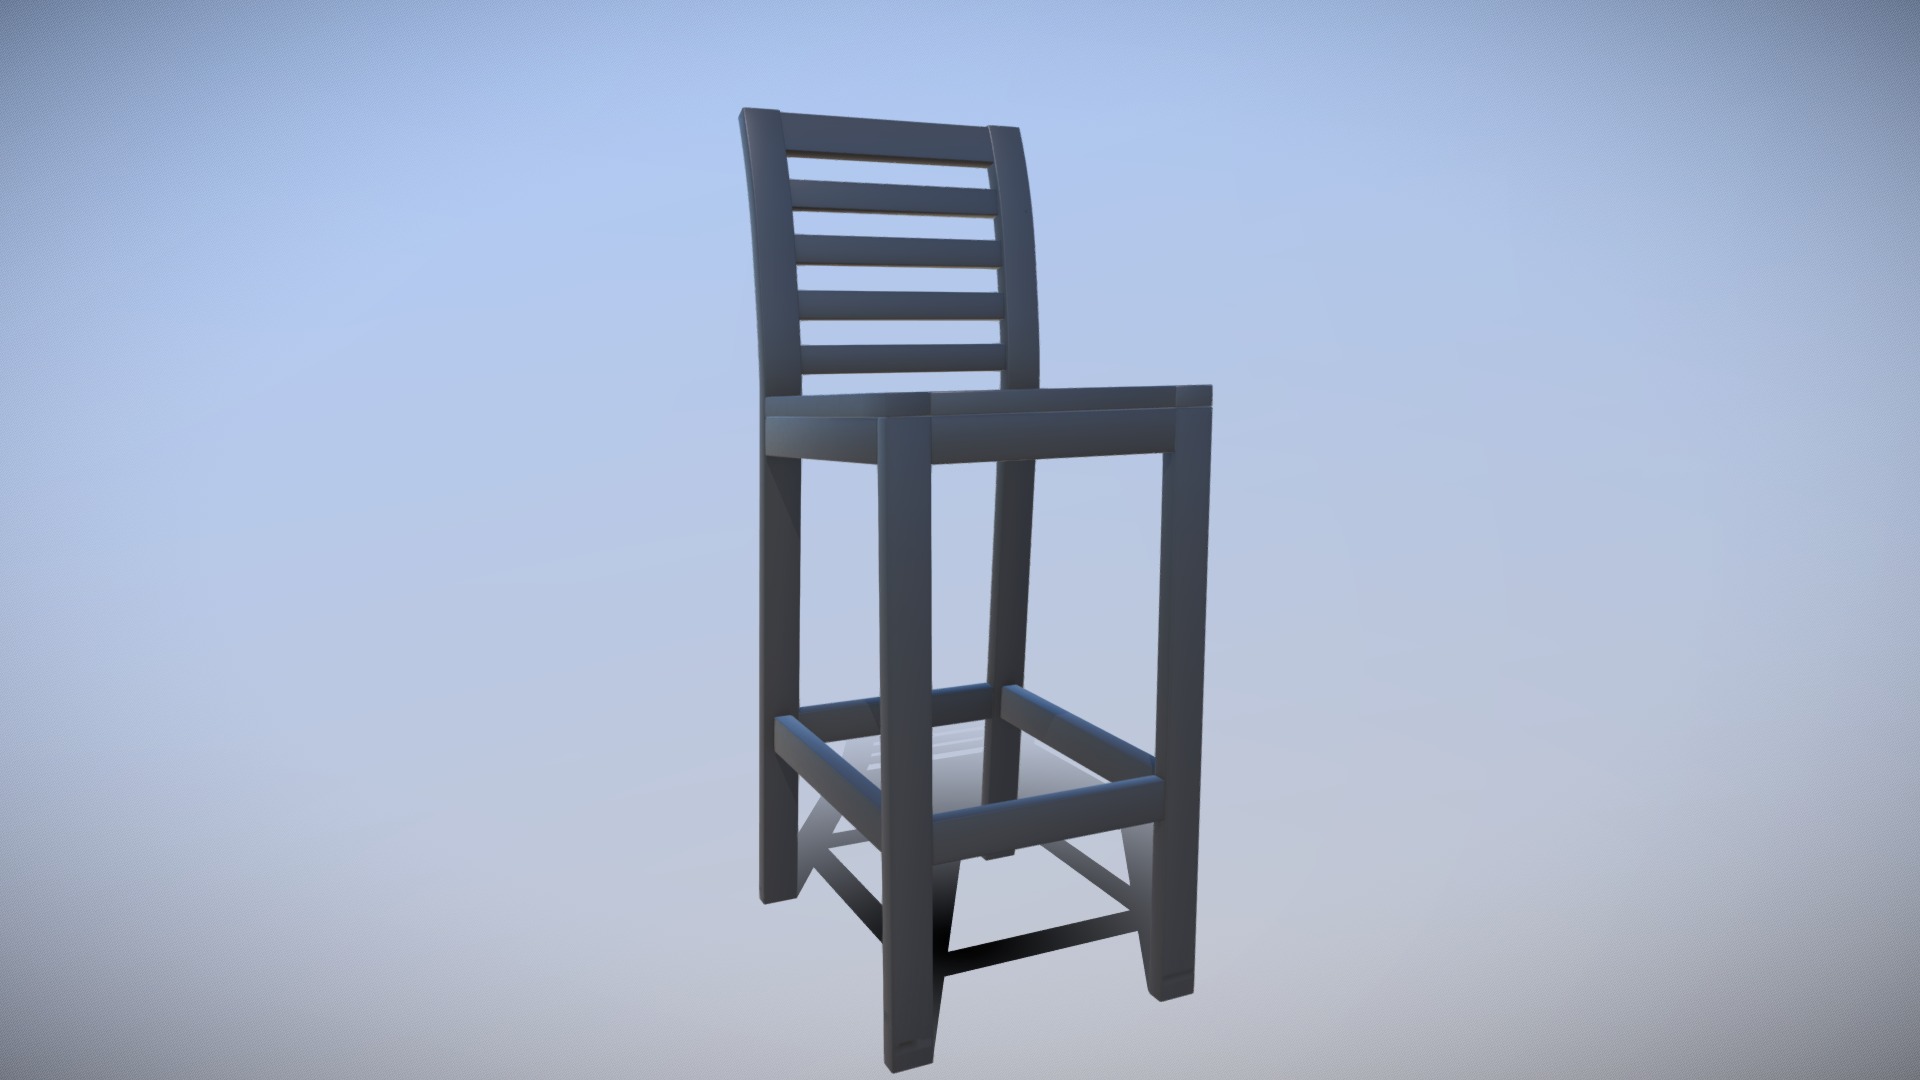 3D model PVC Tall Chair Outdoor Low Poly - This is a 3D model of the PVC Tall Chair Outdoor Low Poly. The 3D model is about a chair against a blue background.